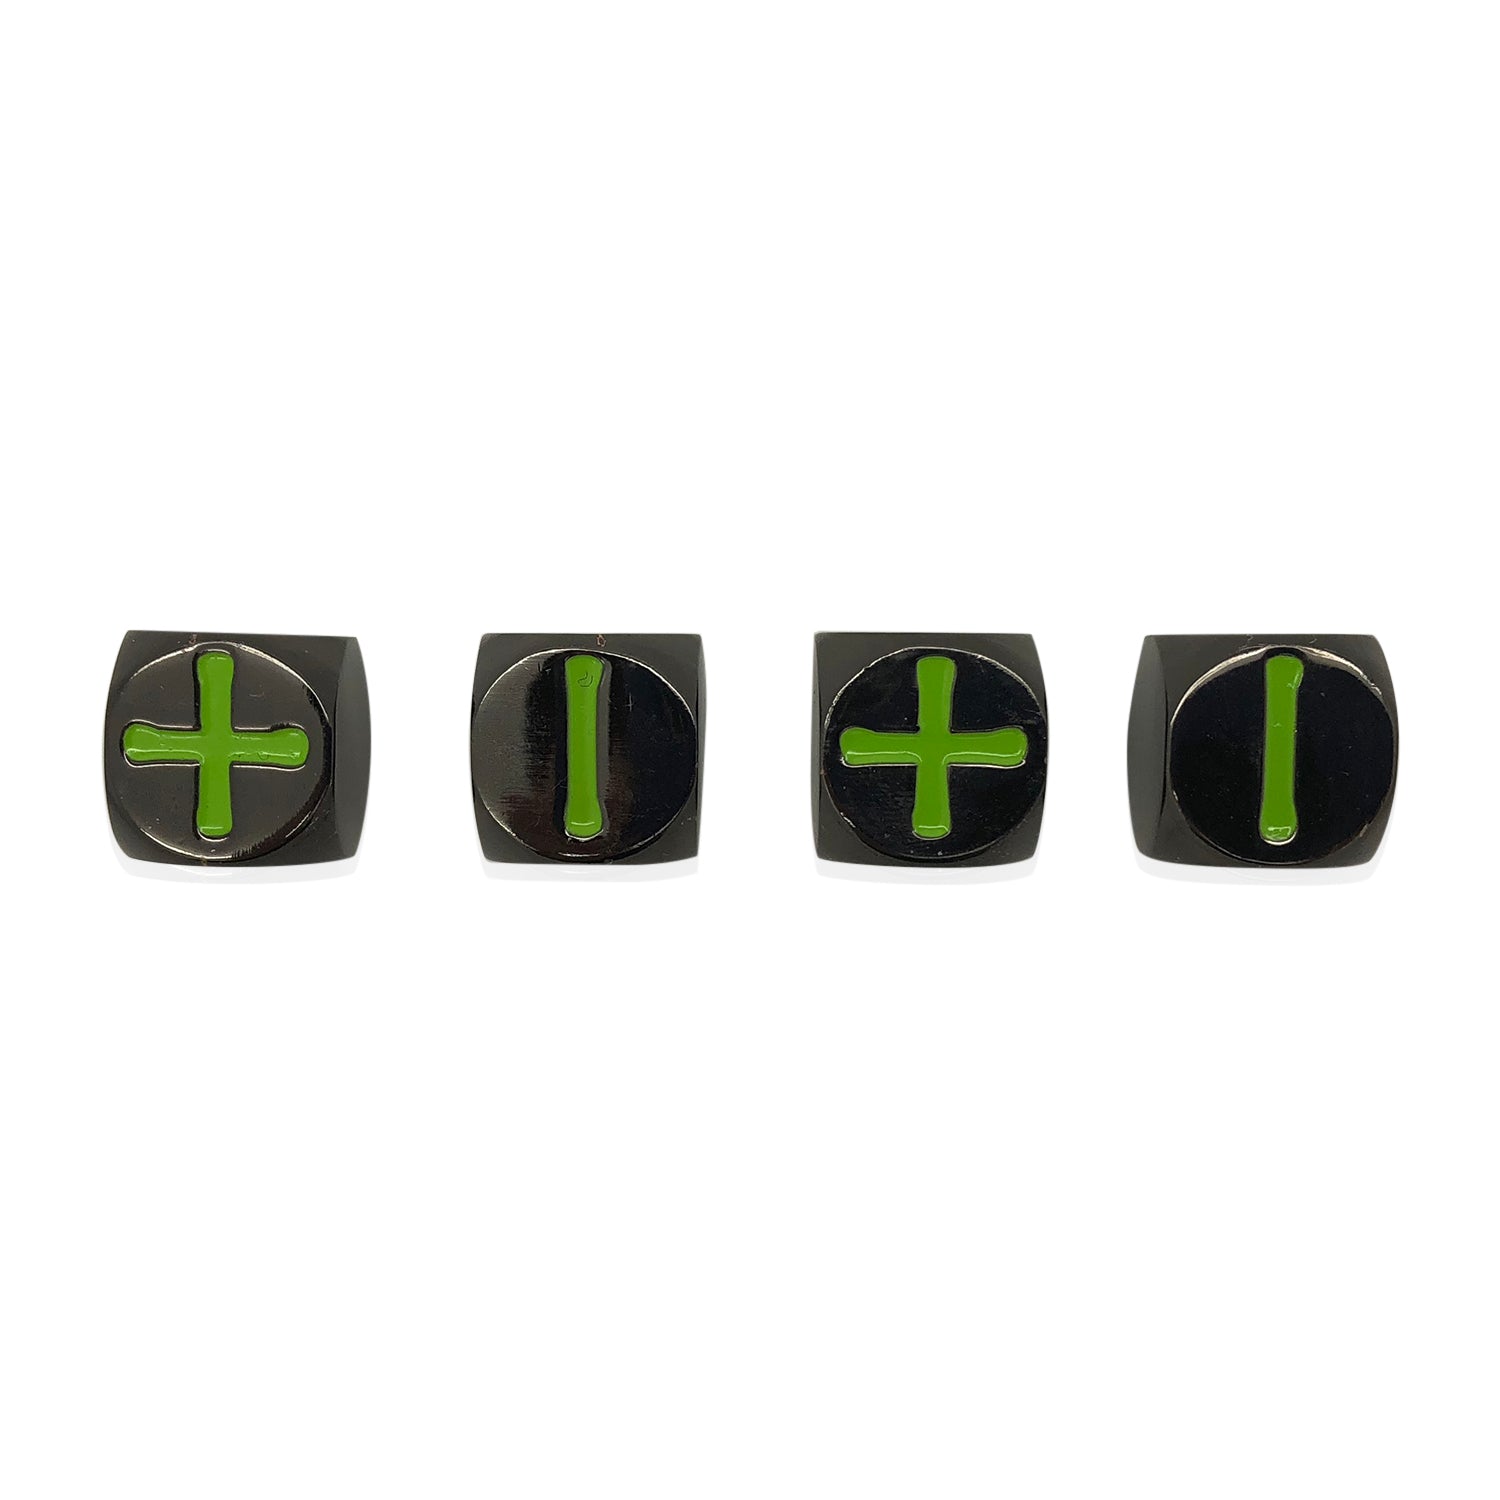 Fate Dice – Poisoned Daggers Pack of 4 Metal Dice - NOR 00716